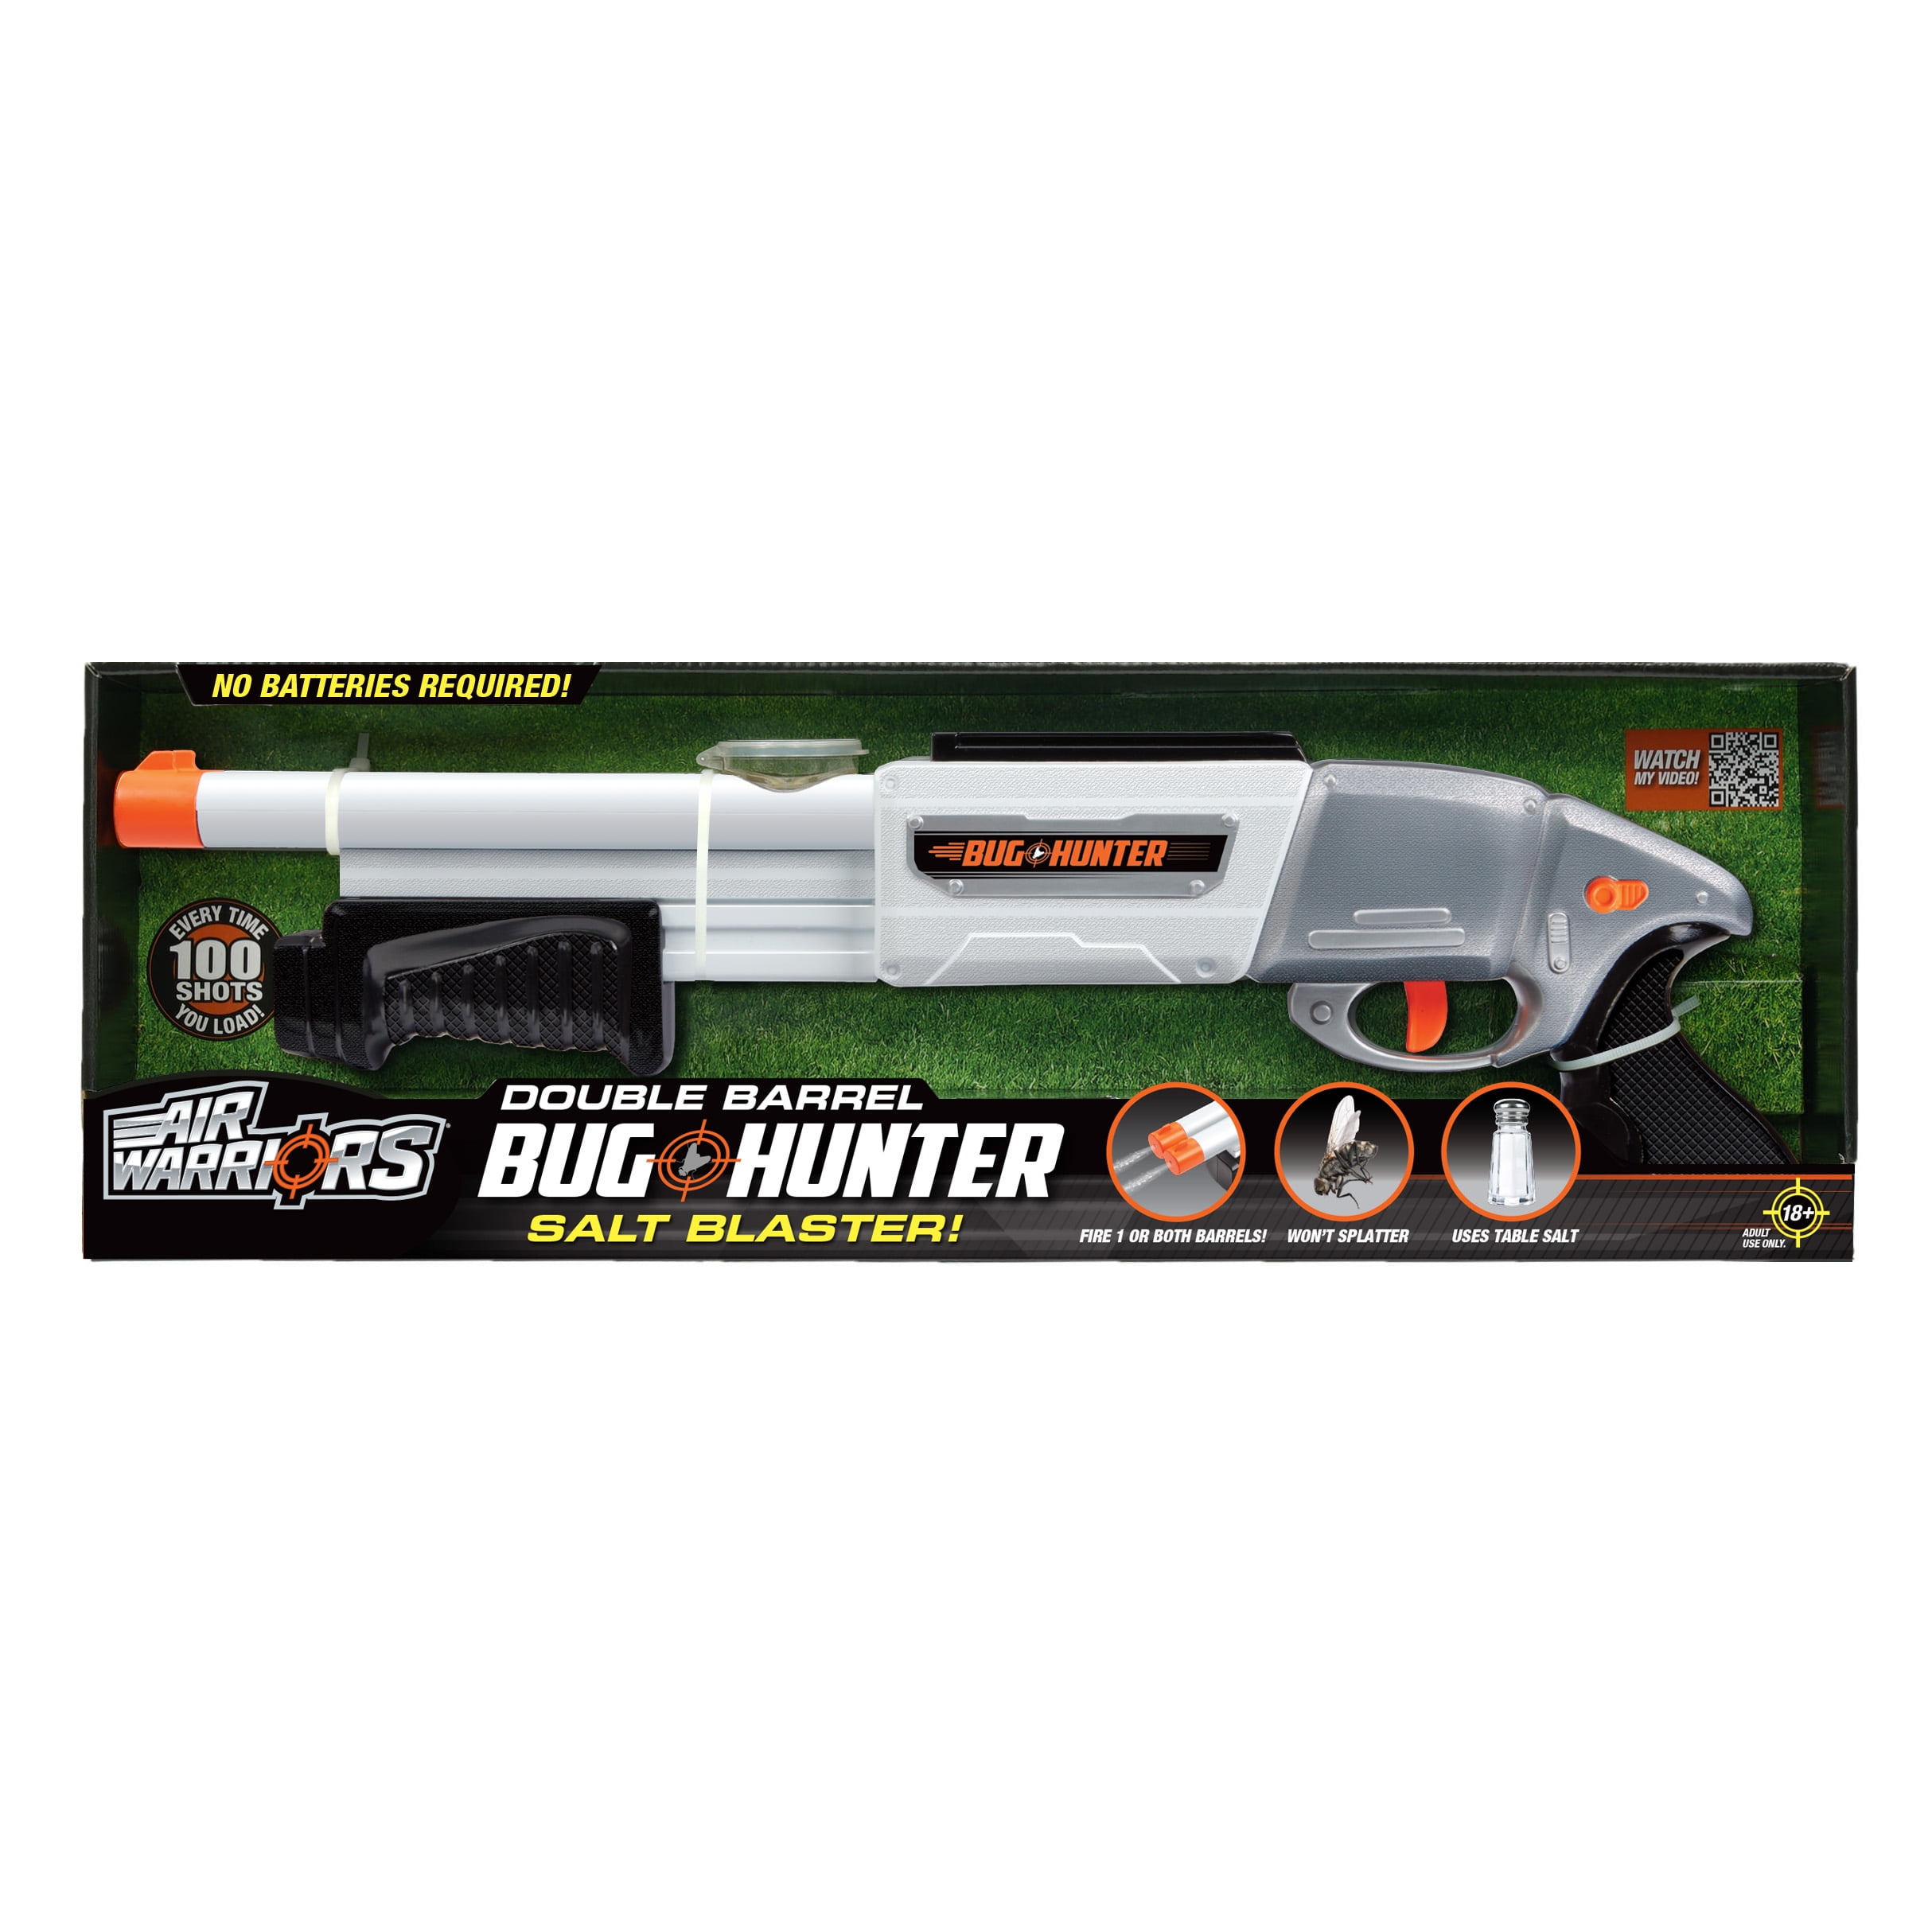 Air Warriors Bug Hunter Double Barrel Salt Blaster with Dual Stage